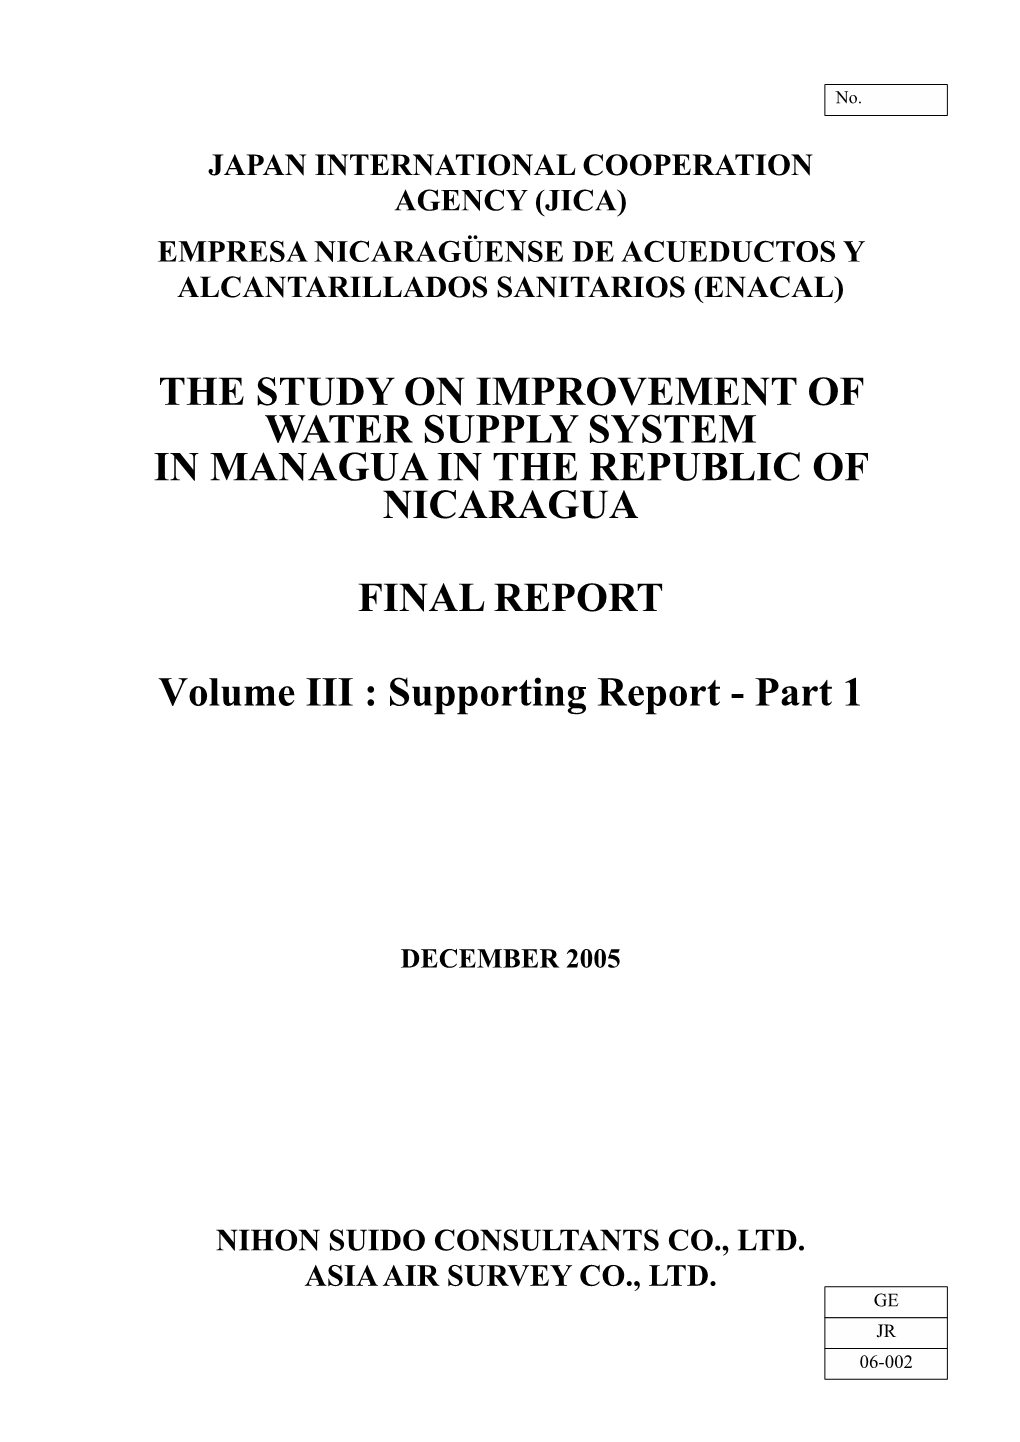 The Study on Improvement of Water Supply System in Managua in the Republic of Nicaragua